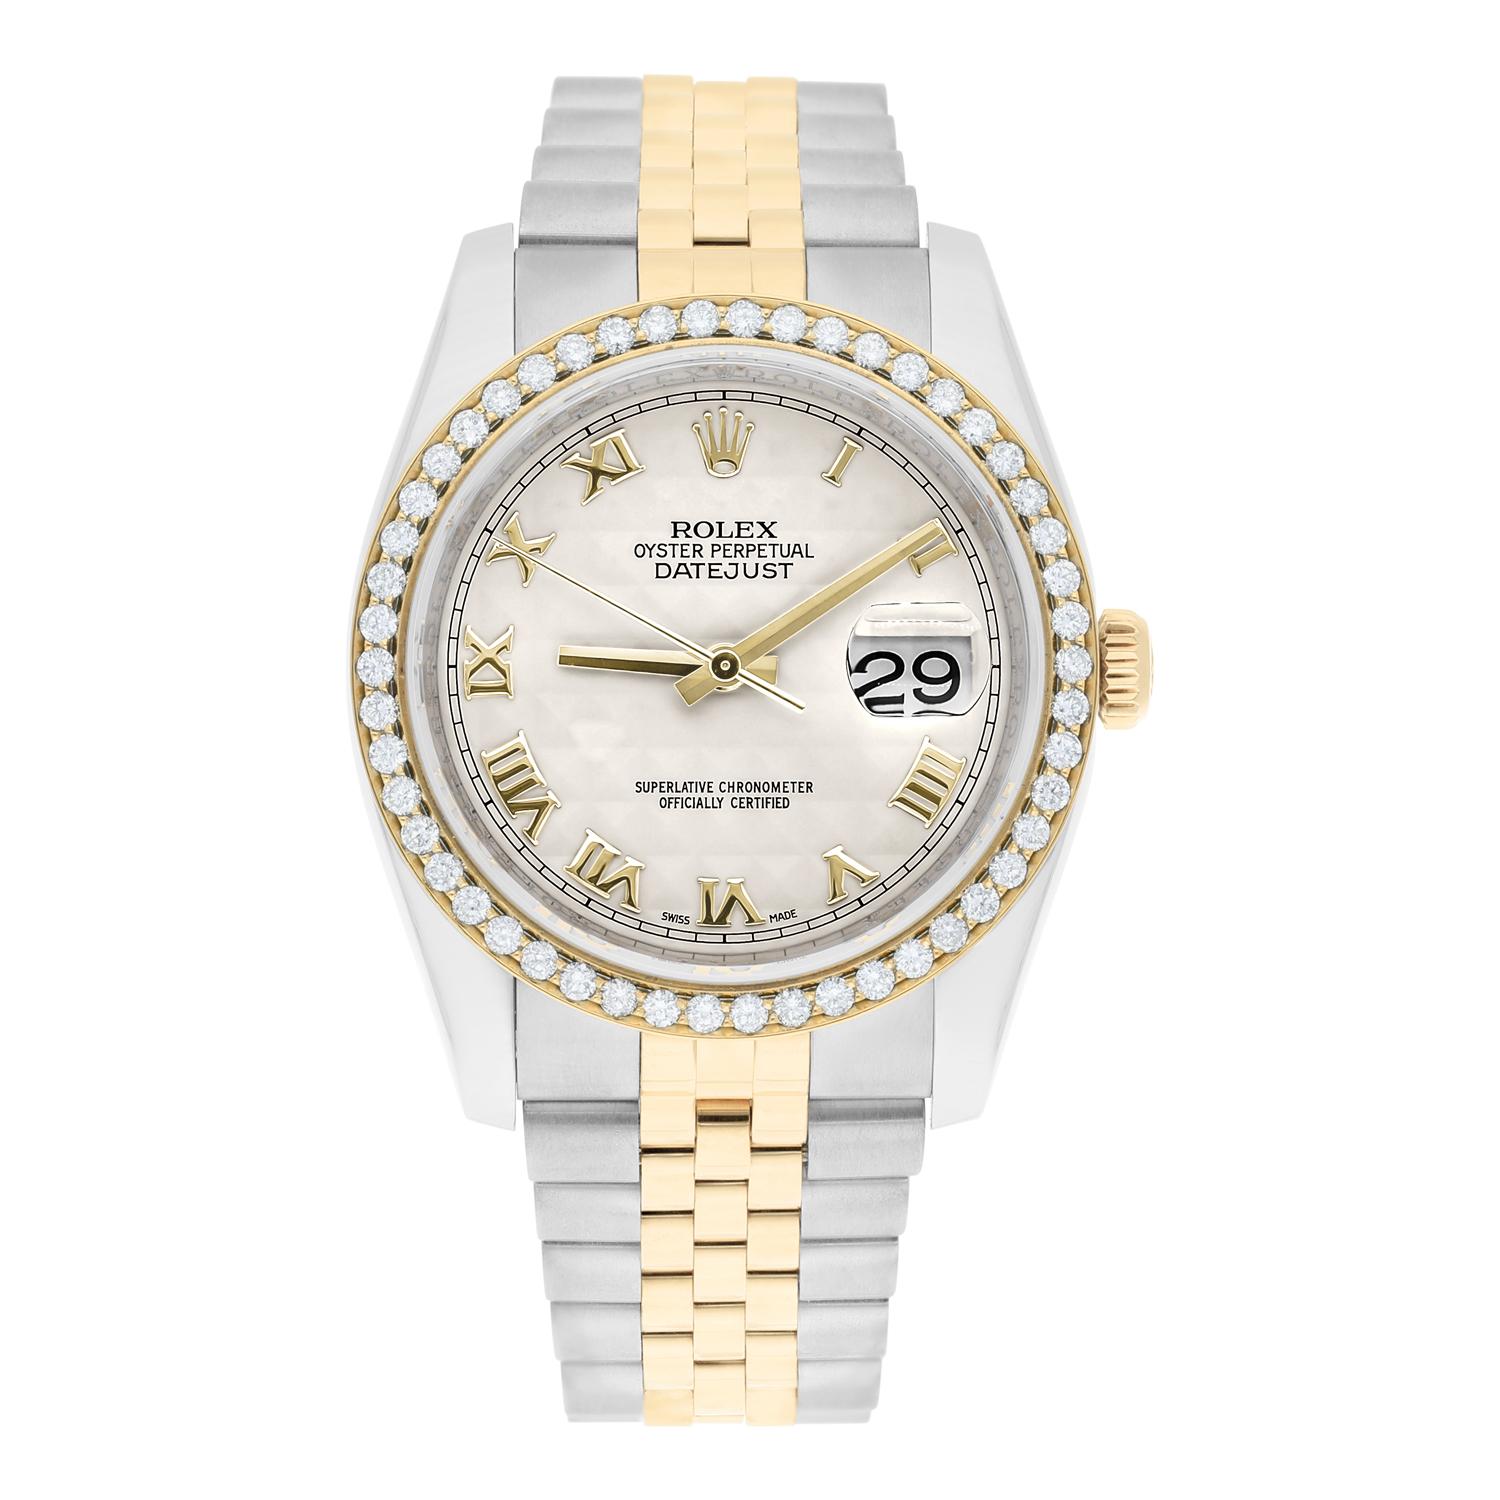 Rolex Datejust 36 Gold and Steel 116233 Ivory Pyramid Roman Dial Custom Diamond Bezel Jubilee Watch

This watch has been professionally polished, serviced and is in excellent overall condition. There are absolutely no visible scratches or blemishes.